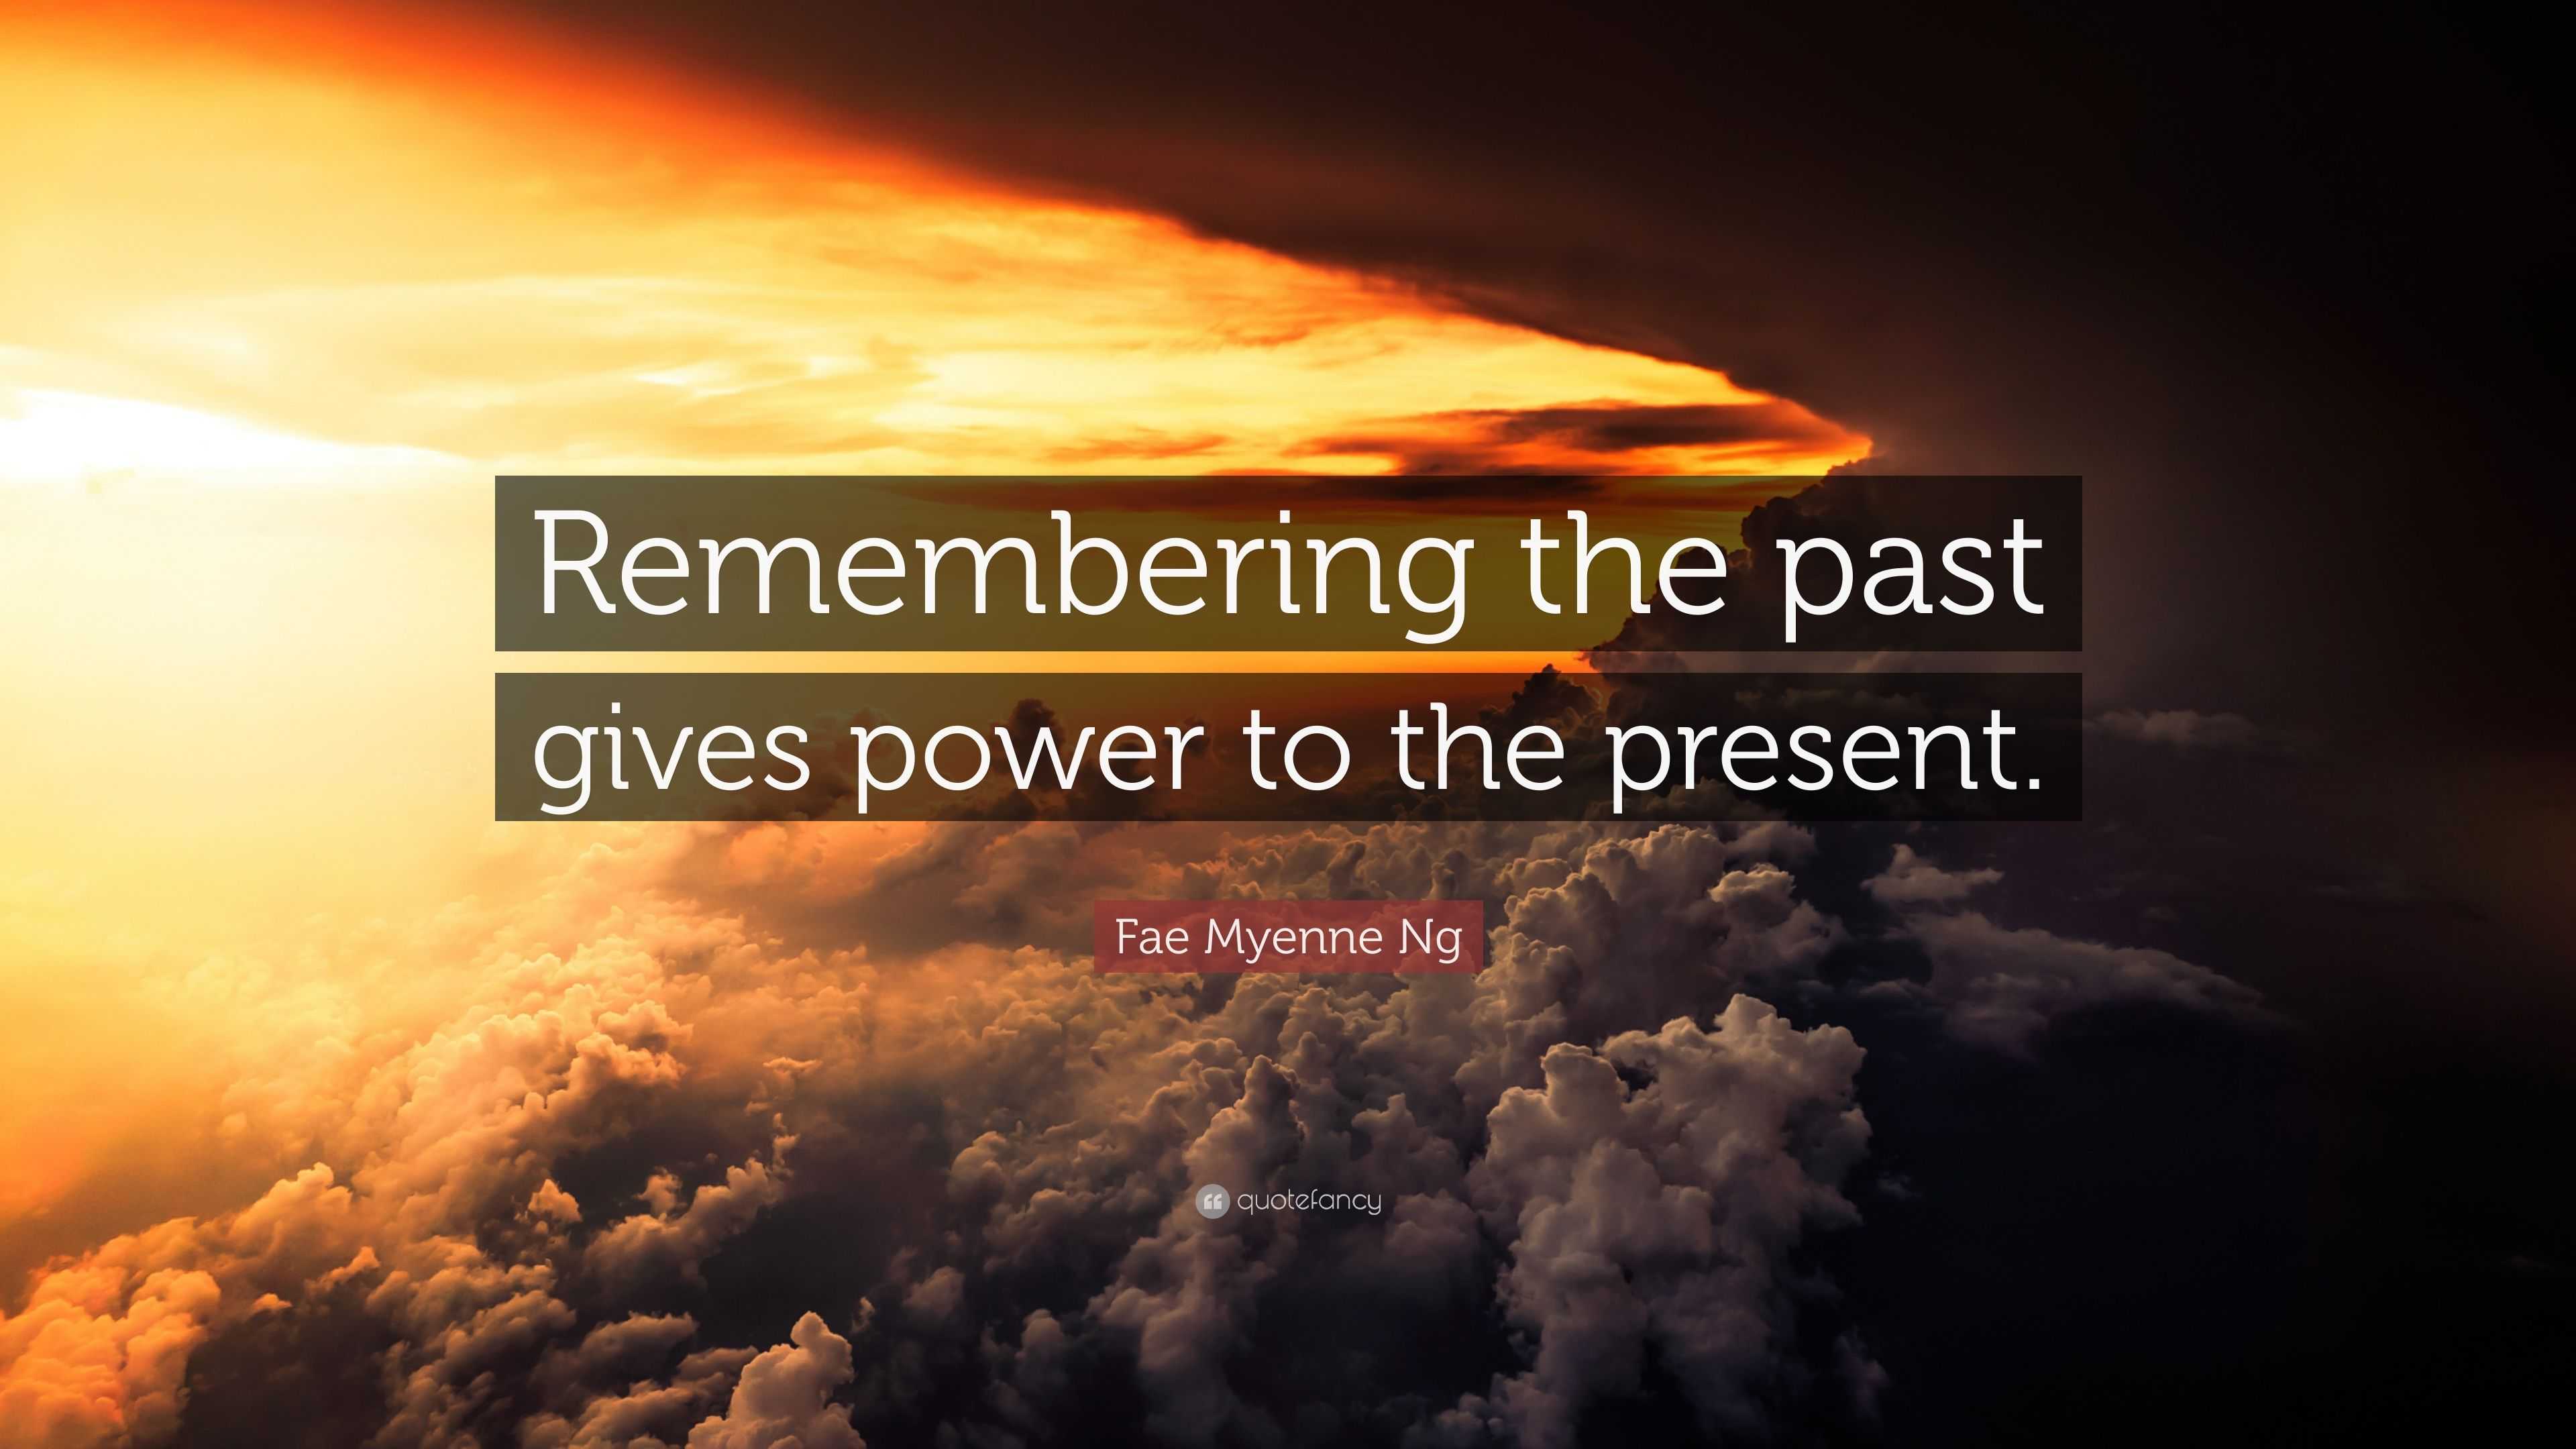 Fae Myenne Ng Quote: “Remembering the past gives power to the present.”